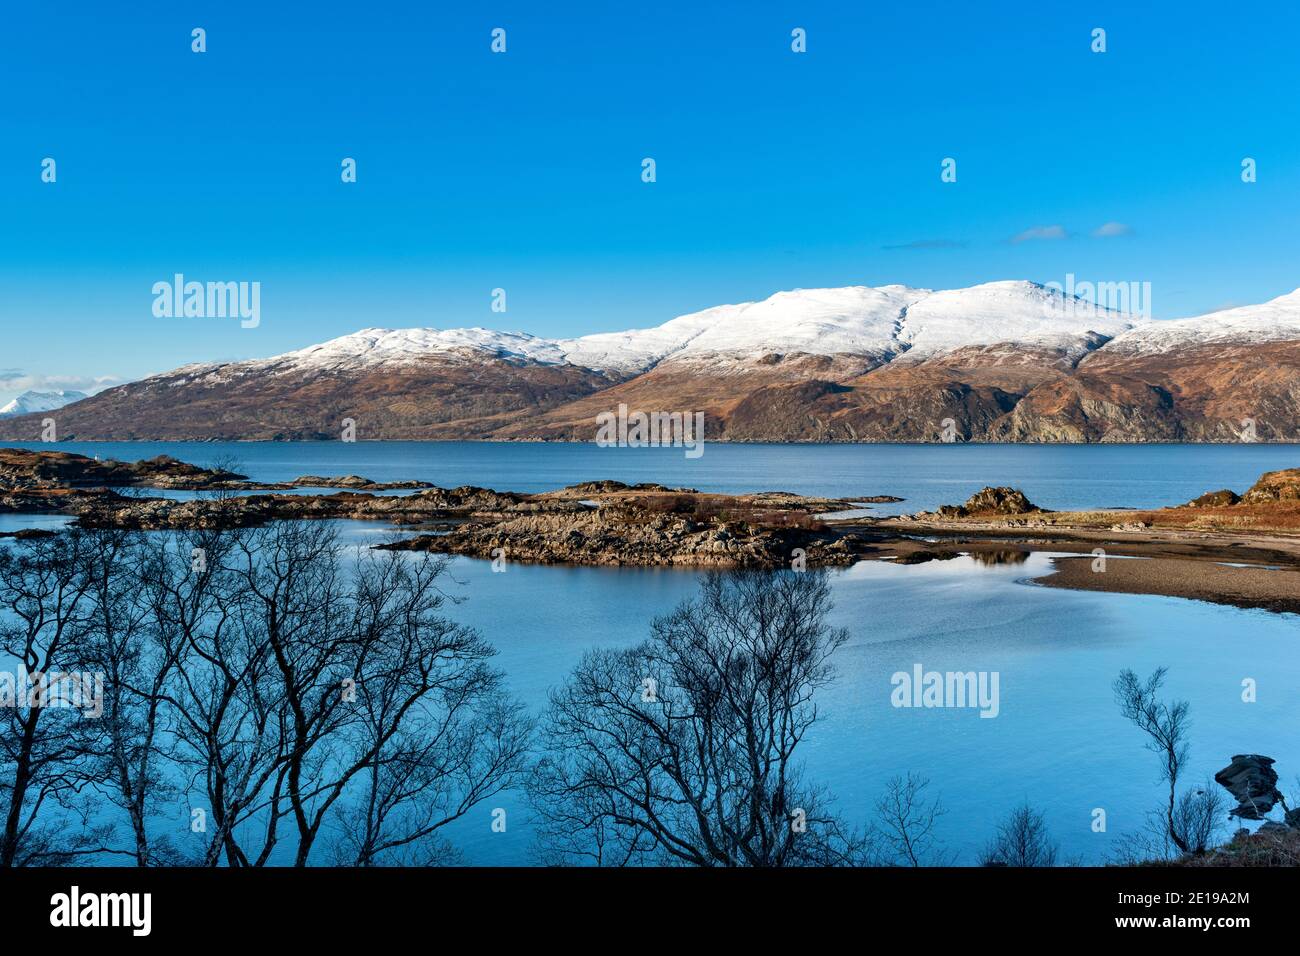 SCOZIA WEST COAST HIGHLANDS KINTAIL SANDAIG BAY ISLANDS AND THE MONTAGNE INNEVATE DI SKYE IN INVERNO Foto Stock